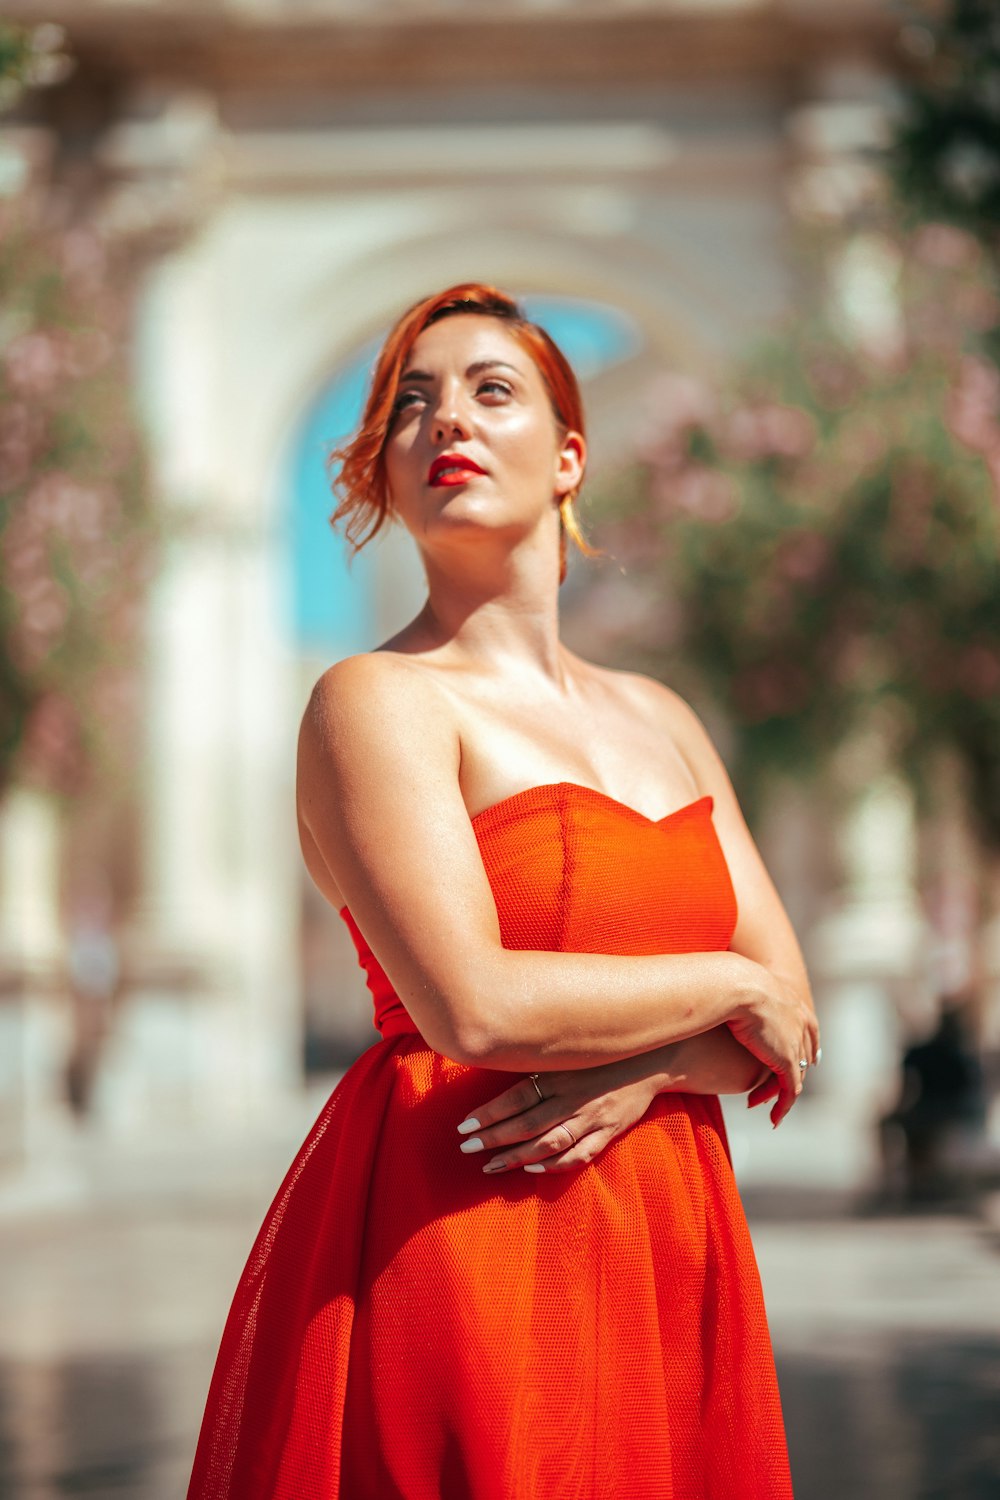 woman in red strapless dress photo – Free Evening dress Image on Unsplash